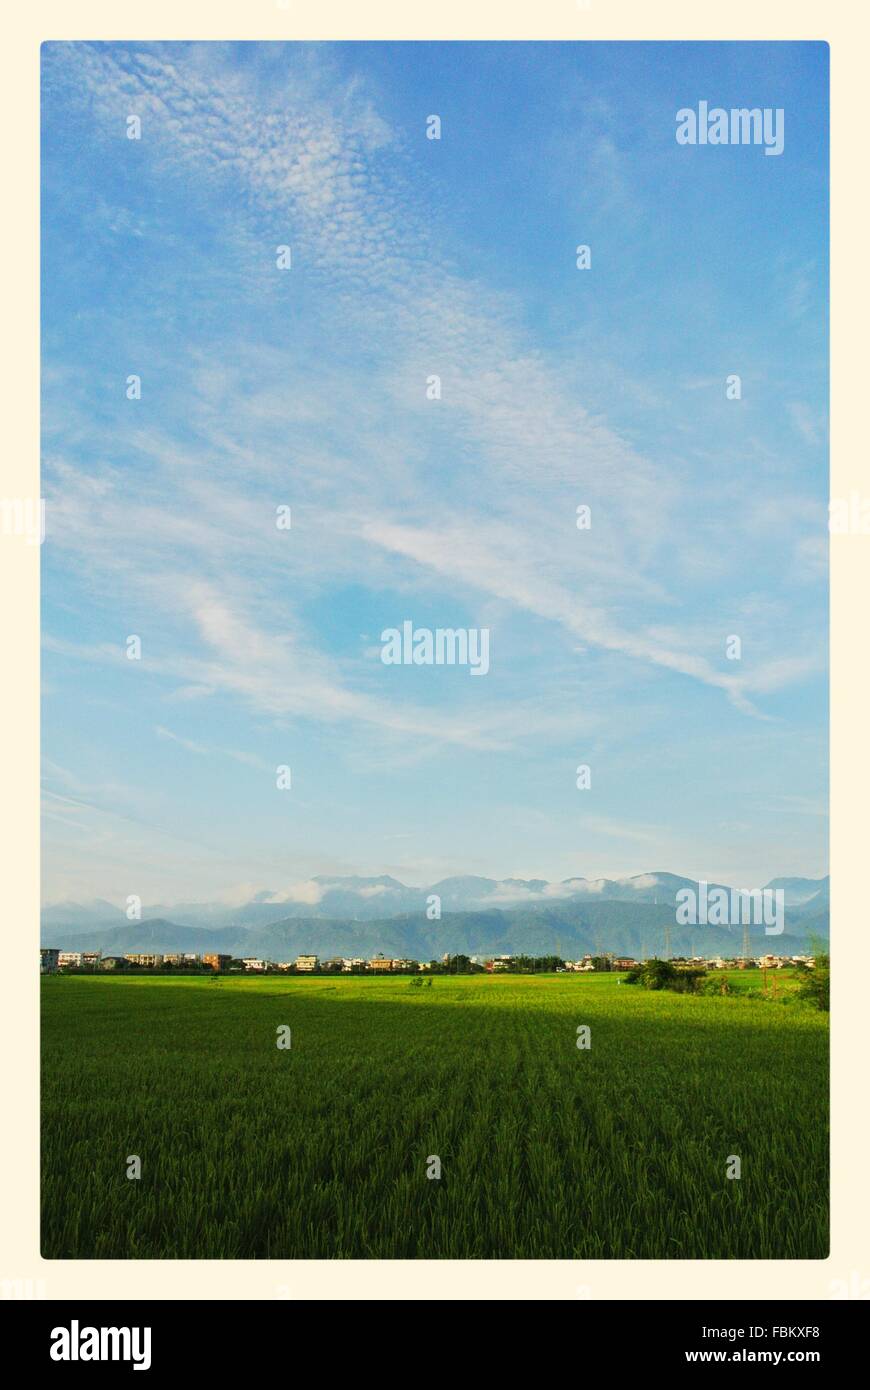 Clear Skies In A Mountainous Setting Stock Photo